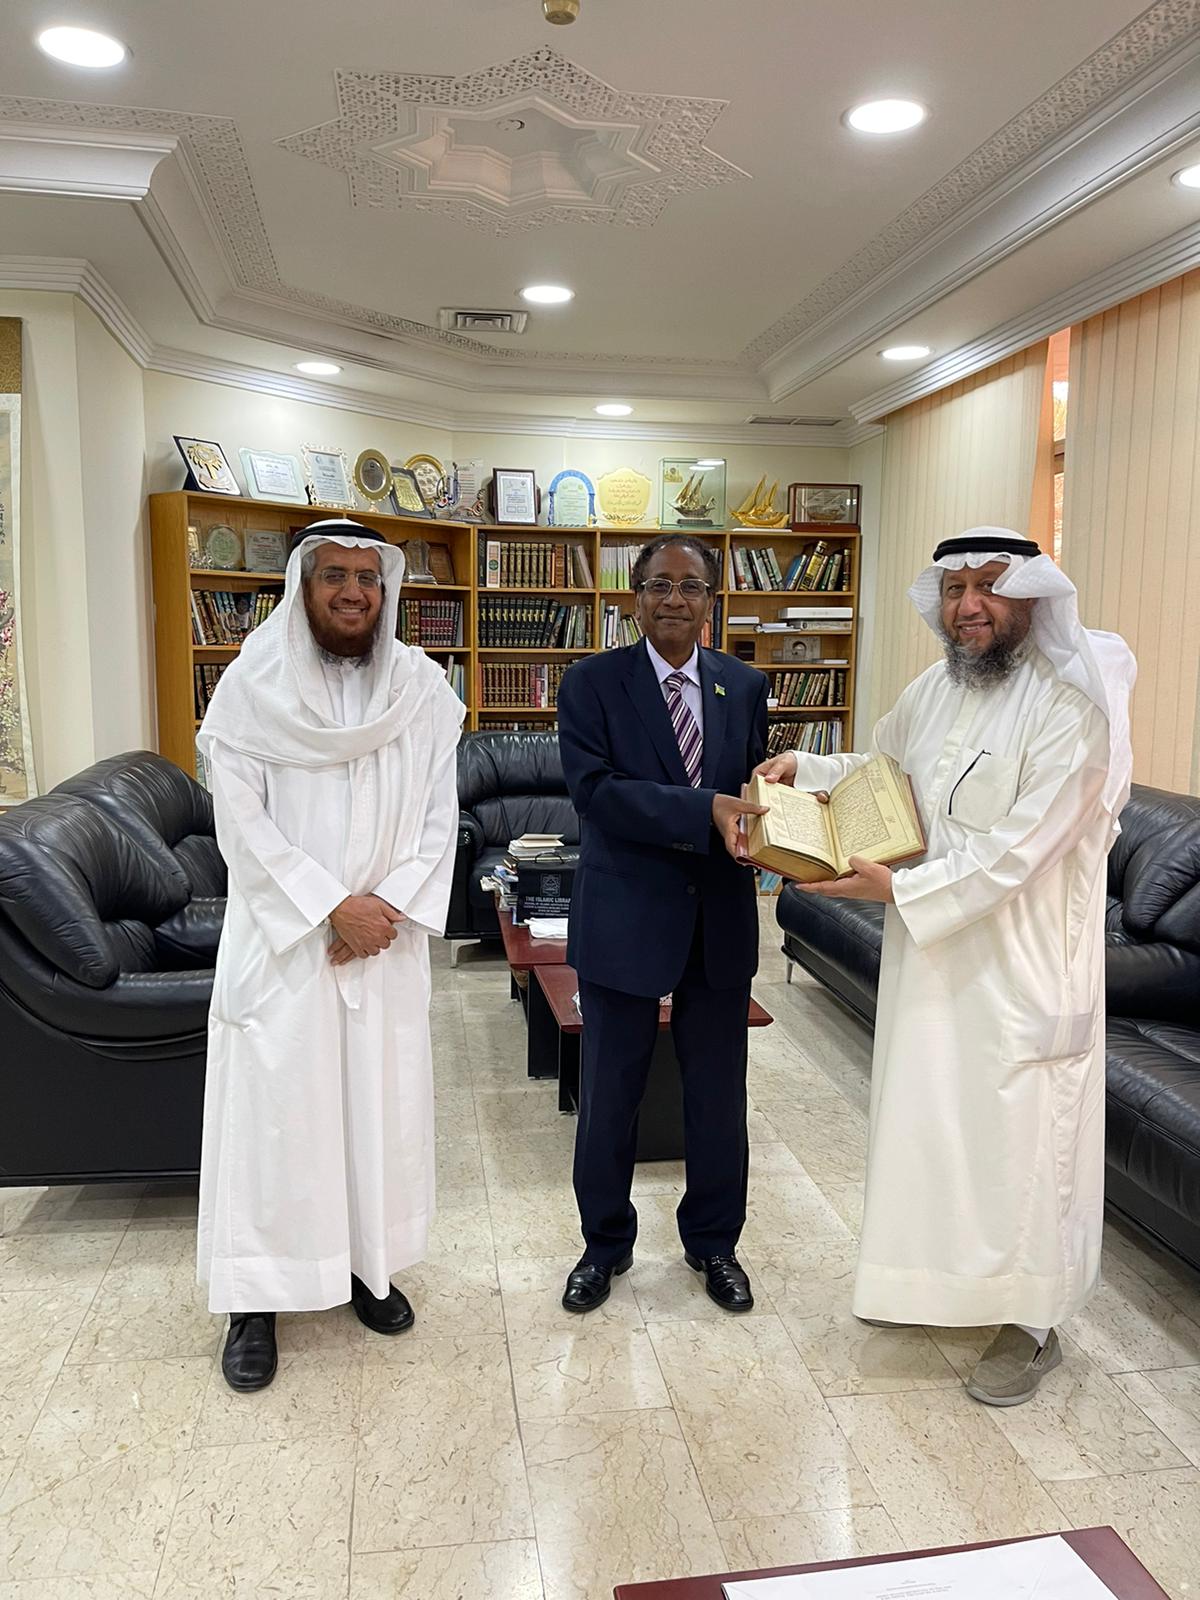 Visit of His Excellency to the Revival of Islamic Heritage Society